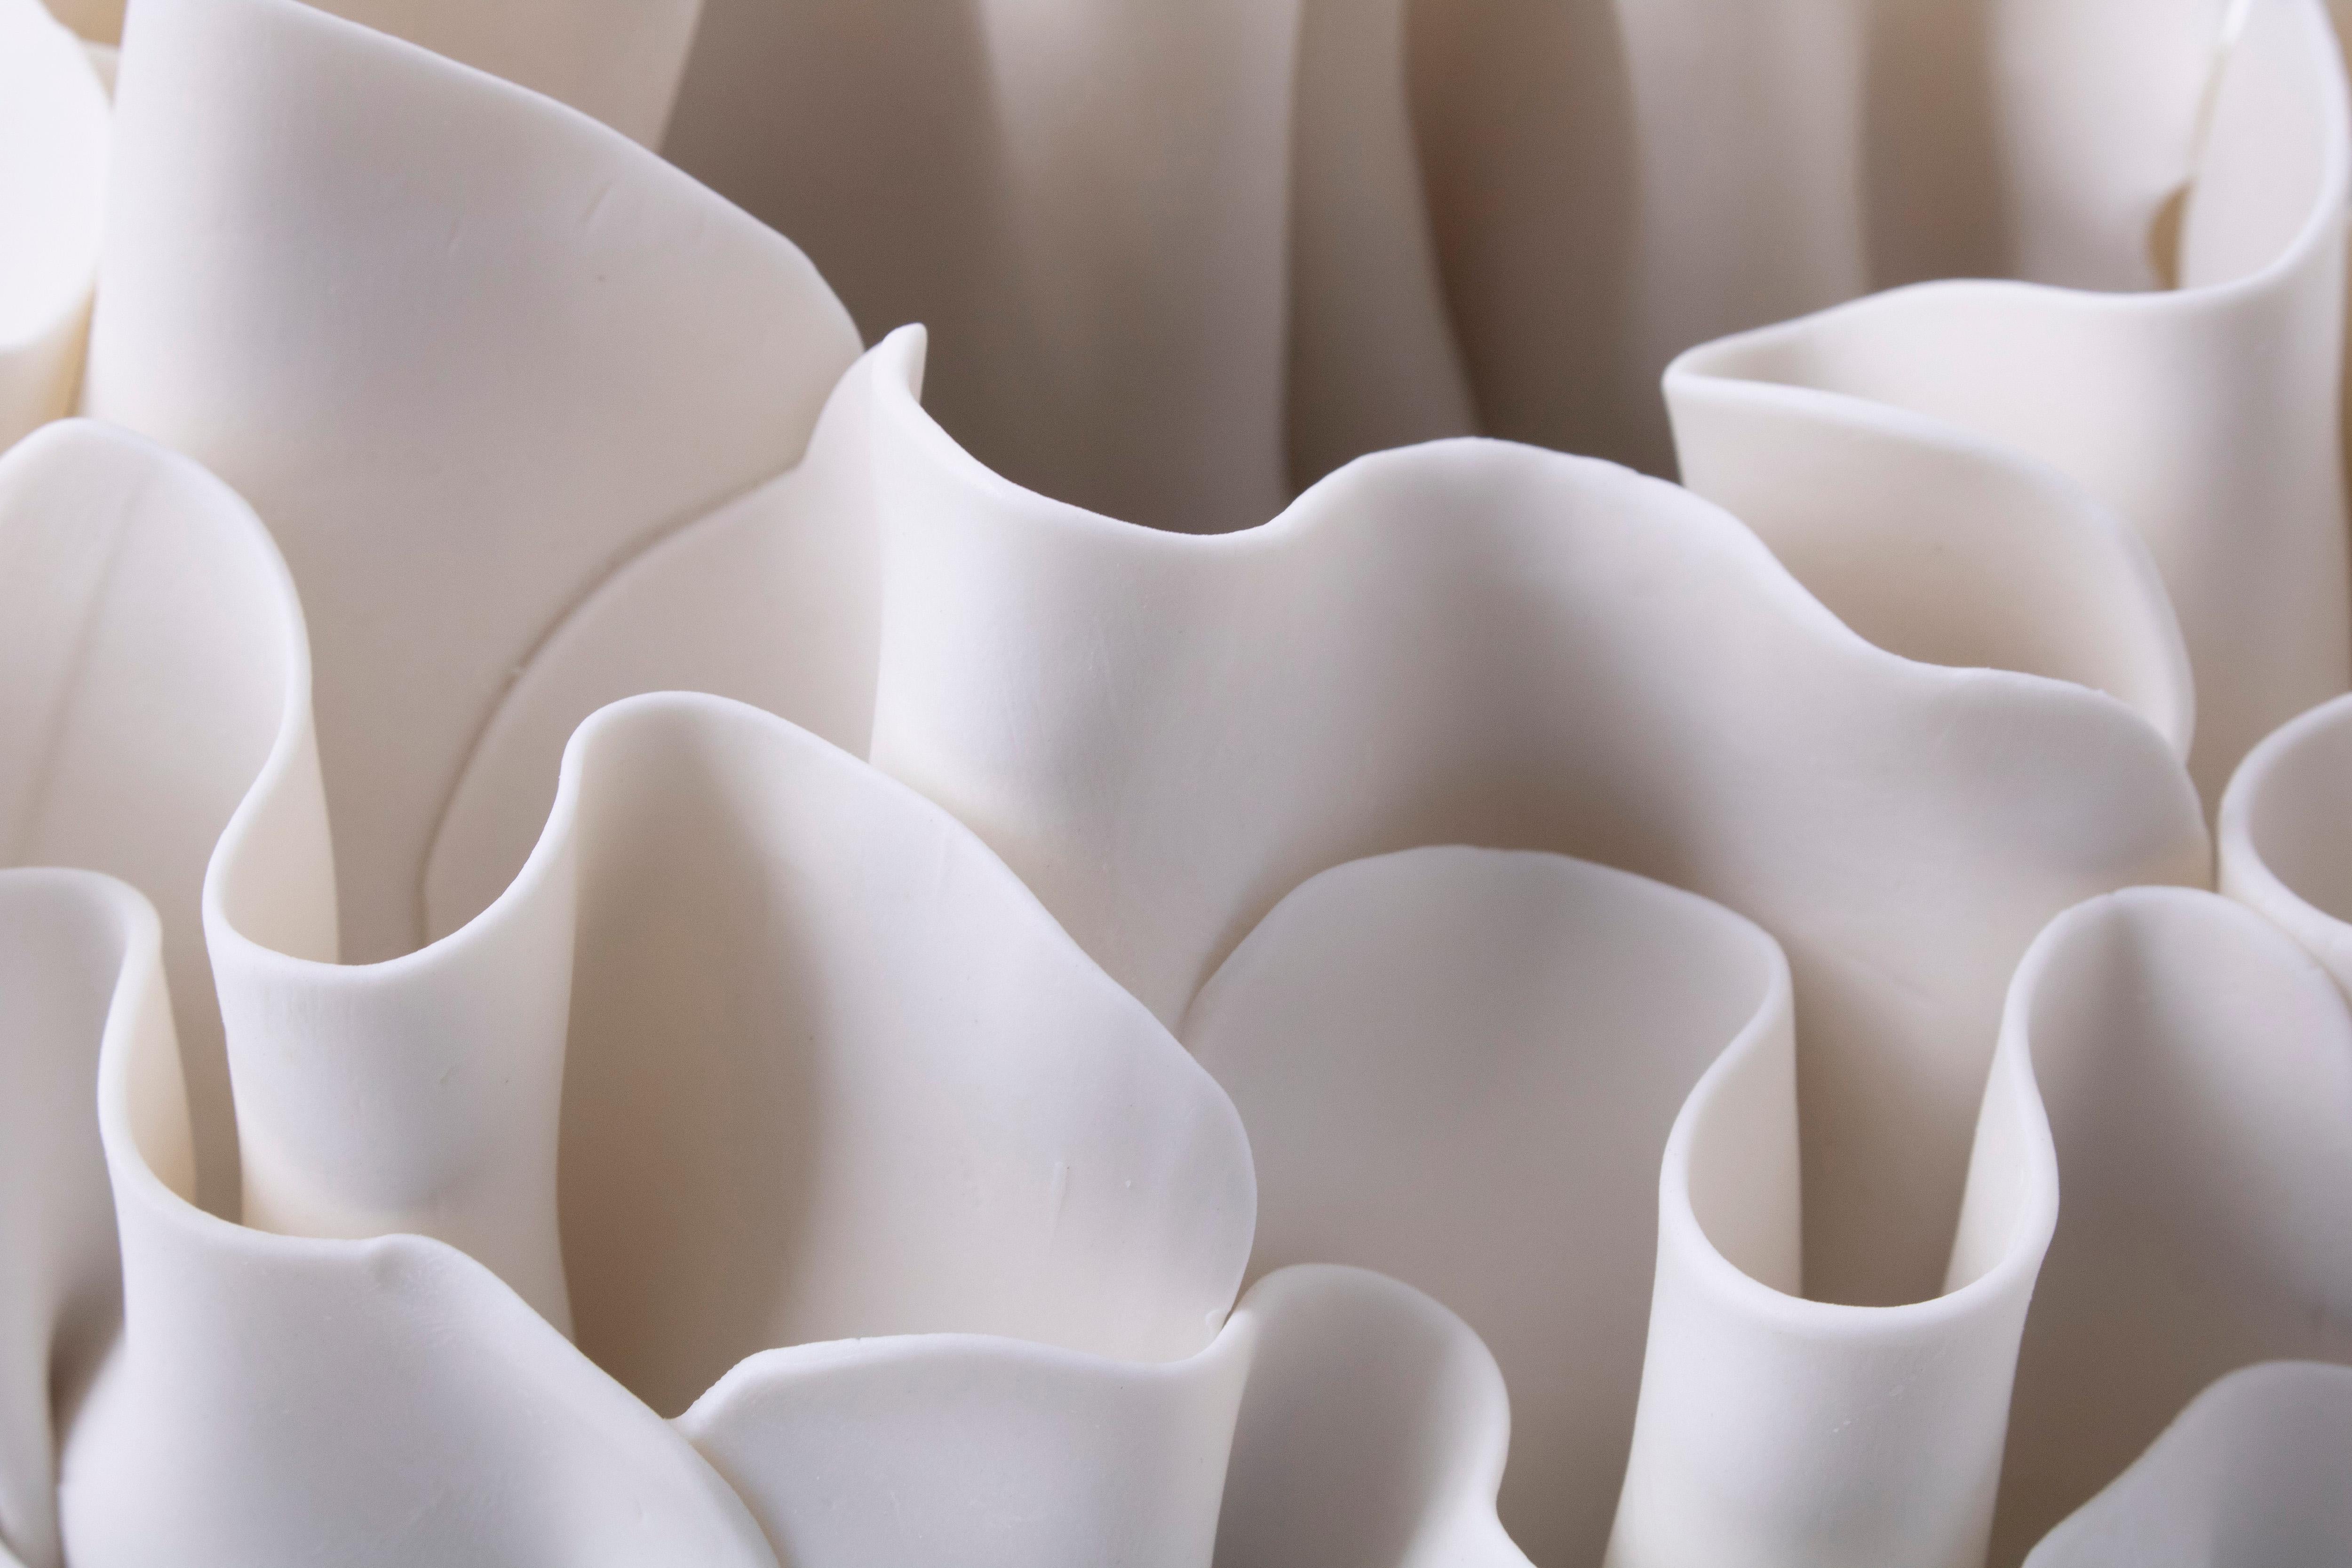 Animals simulating flowers tickled by the light flow of the water: a pure white porcelain bowl rises from these fascinations. Smooth layers of opalescent membranes meet the refined texture of madrepore for a delicate and mesmerizing look. The thin